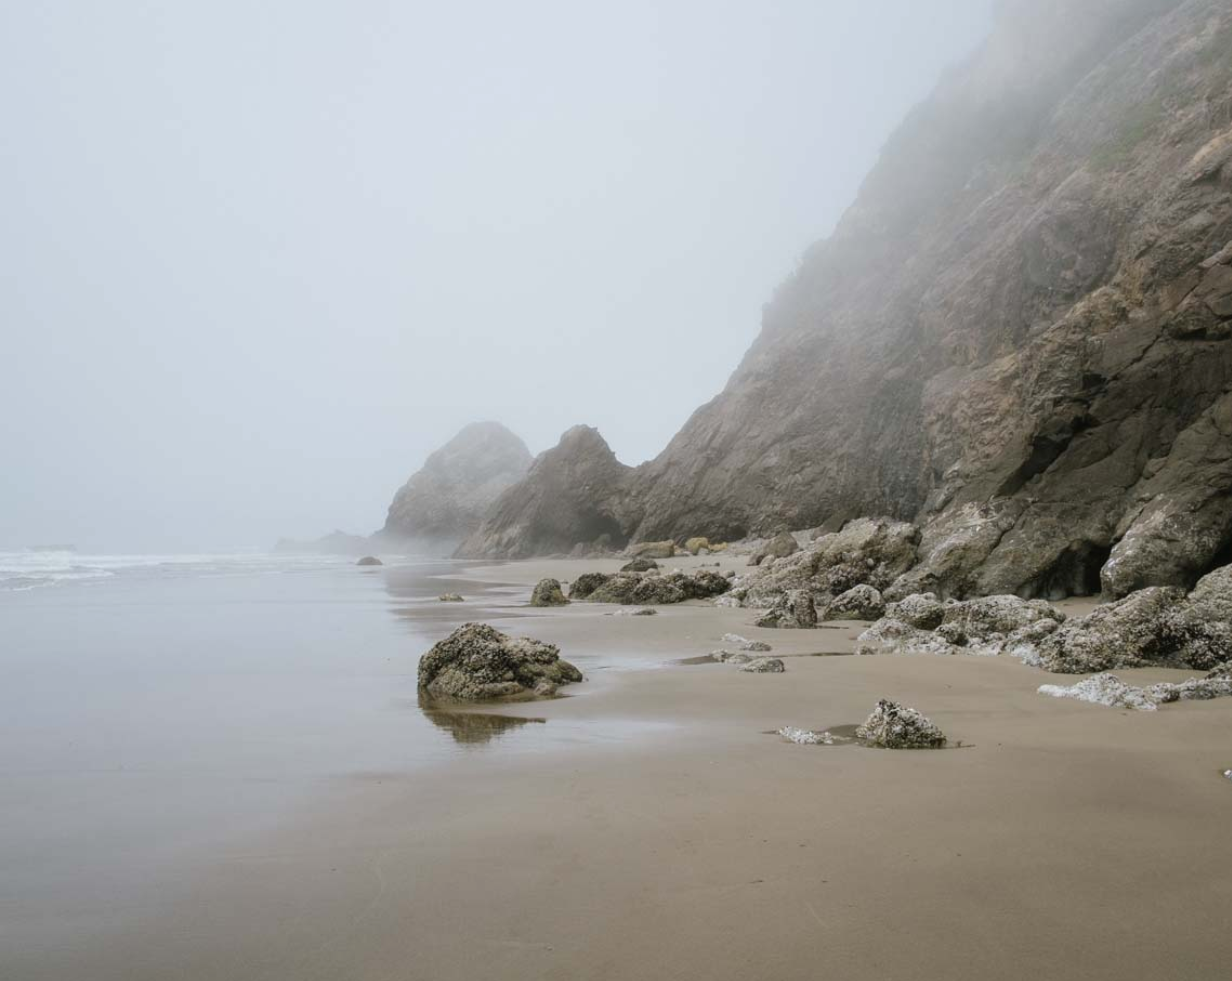 foggy beach with rocks and water